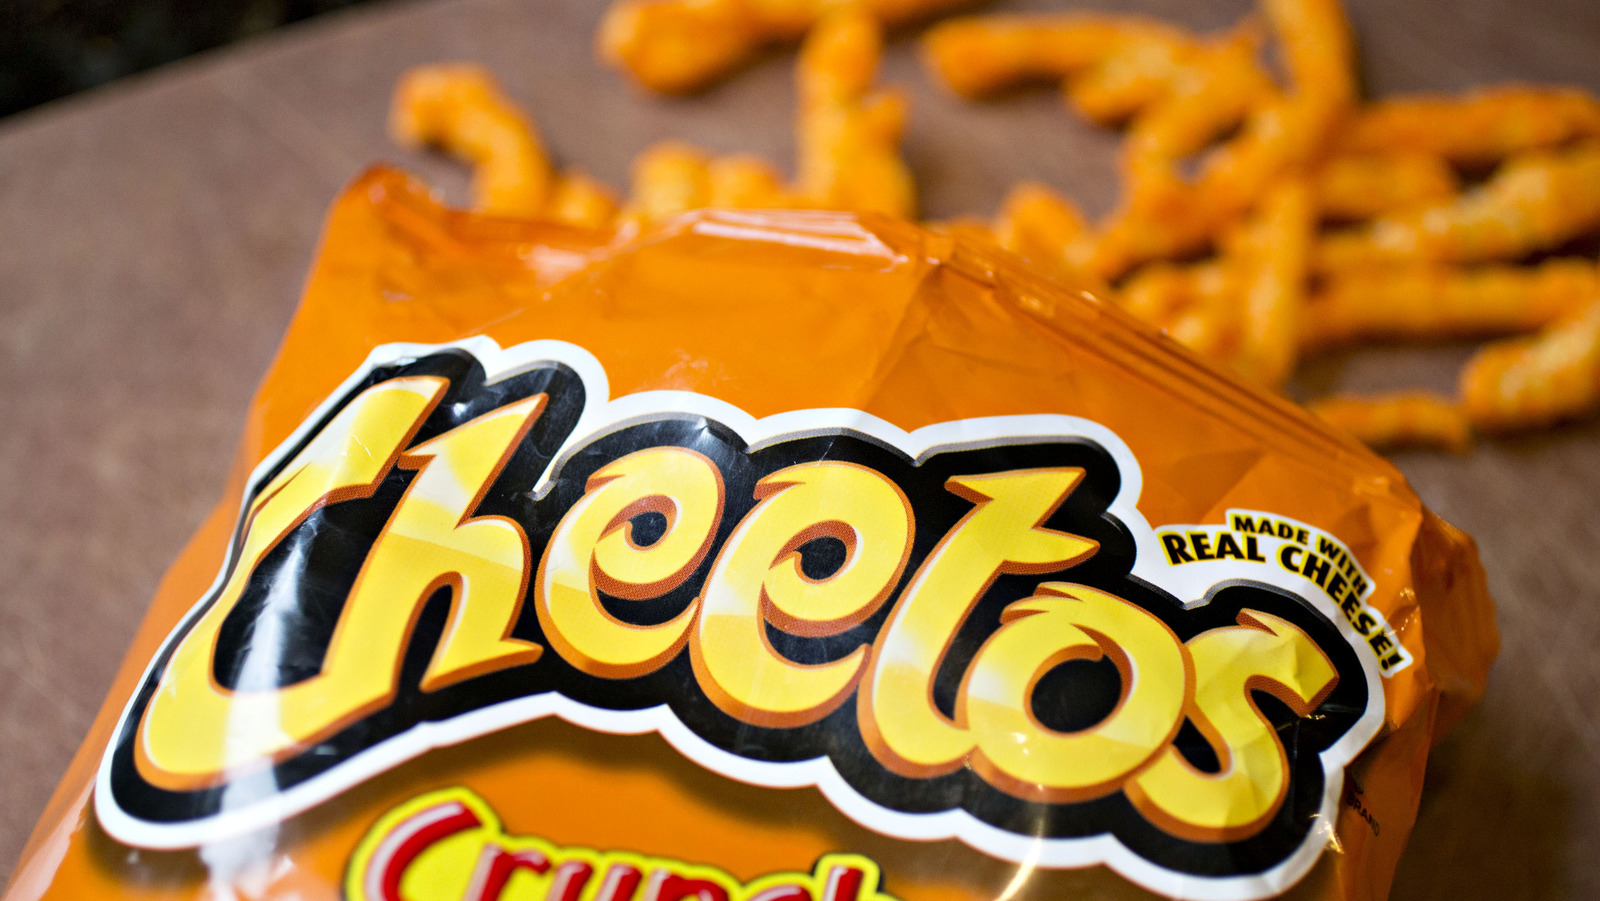 Why You Recognize The Song From The Cheetos Super Bowl Commercial